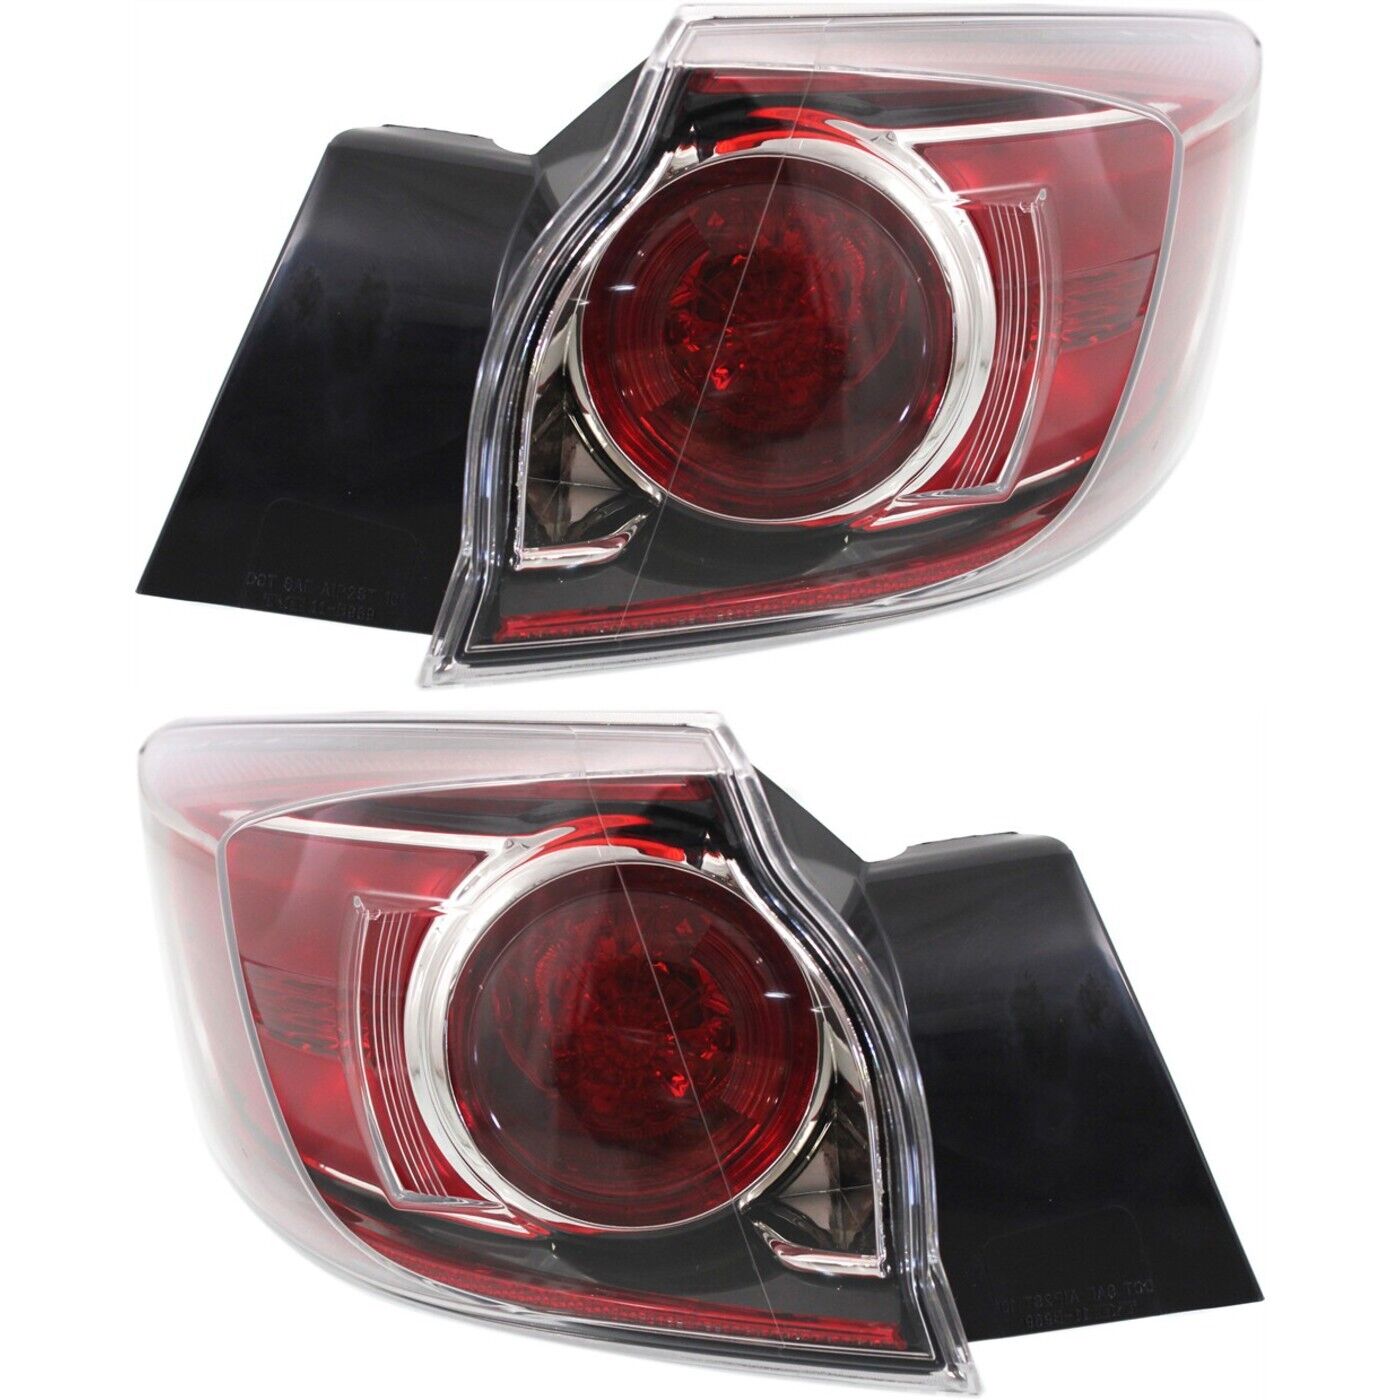 Set of 2 Tail Light For 10-11 Mazda 3 Mazdaspeed Hatchback LH & RH Outer